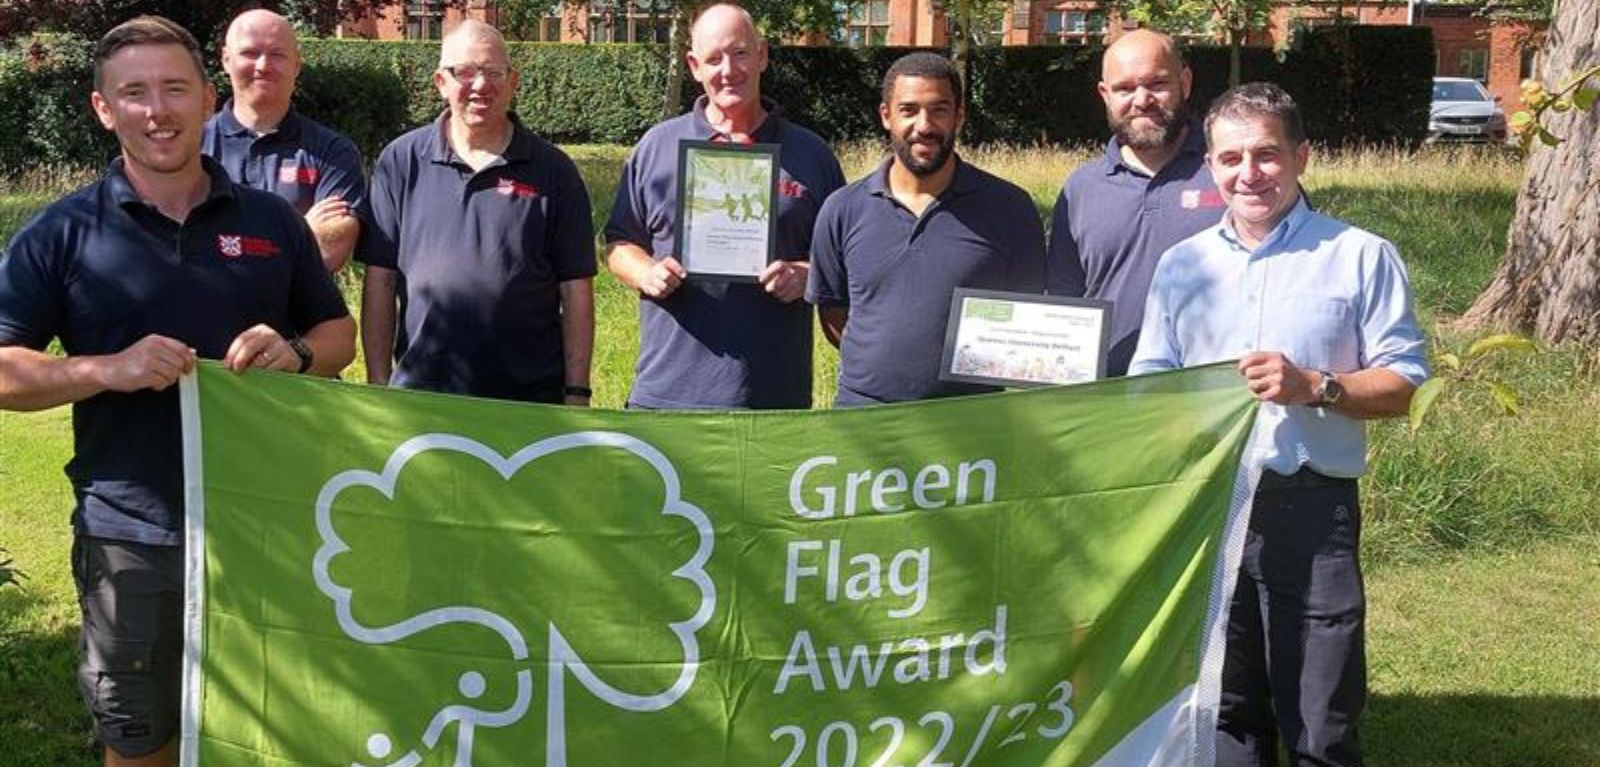 The Garden and Grounds team standing on a lawn holding a Green Flag Awards banner